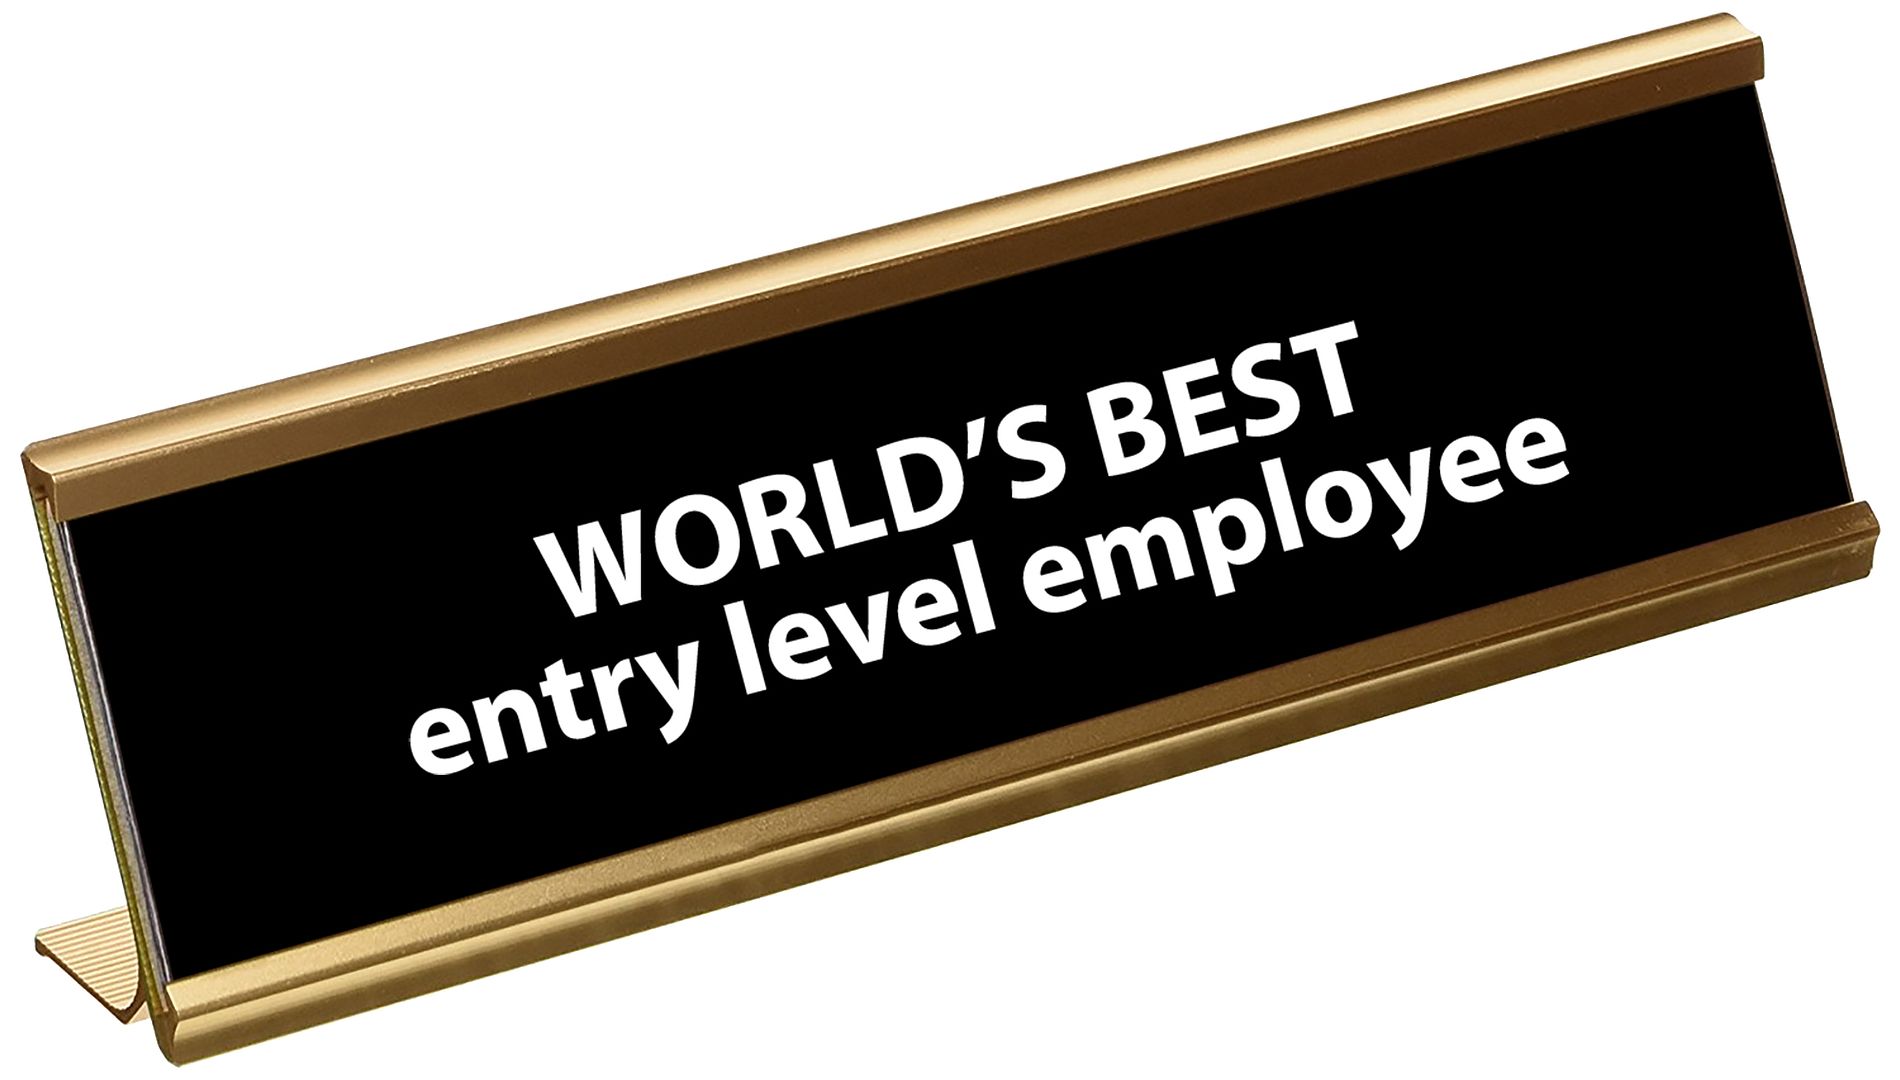 Funny Worlds Best Entry Level Employee Engraved Name Plate 